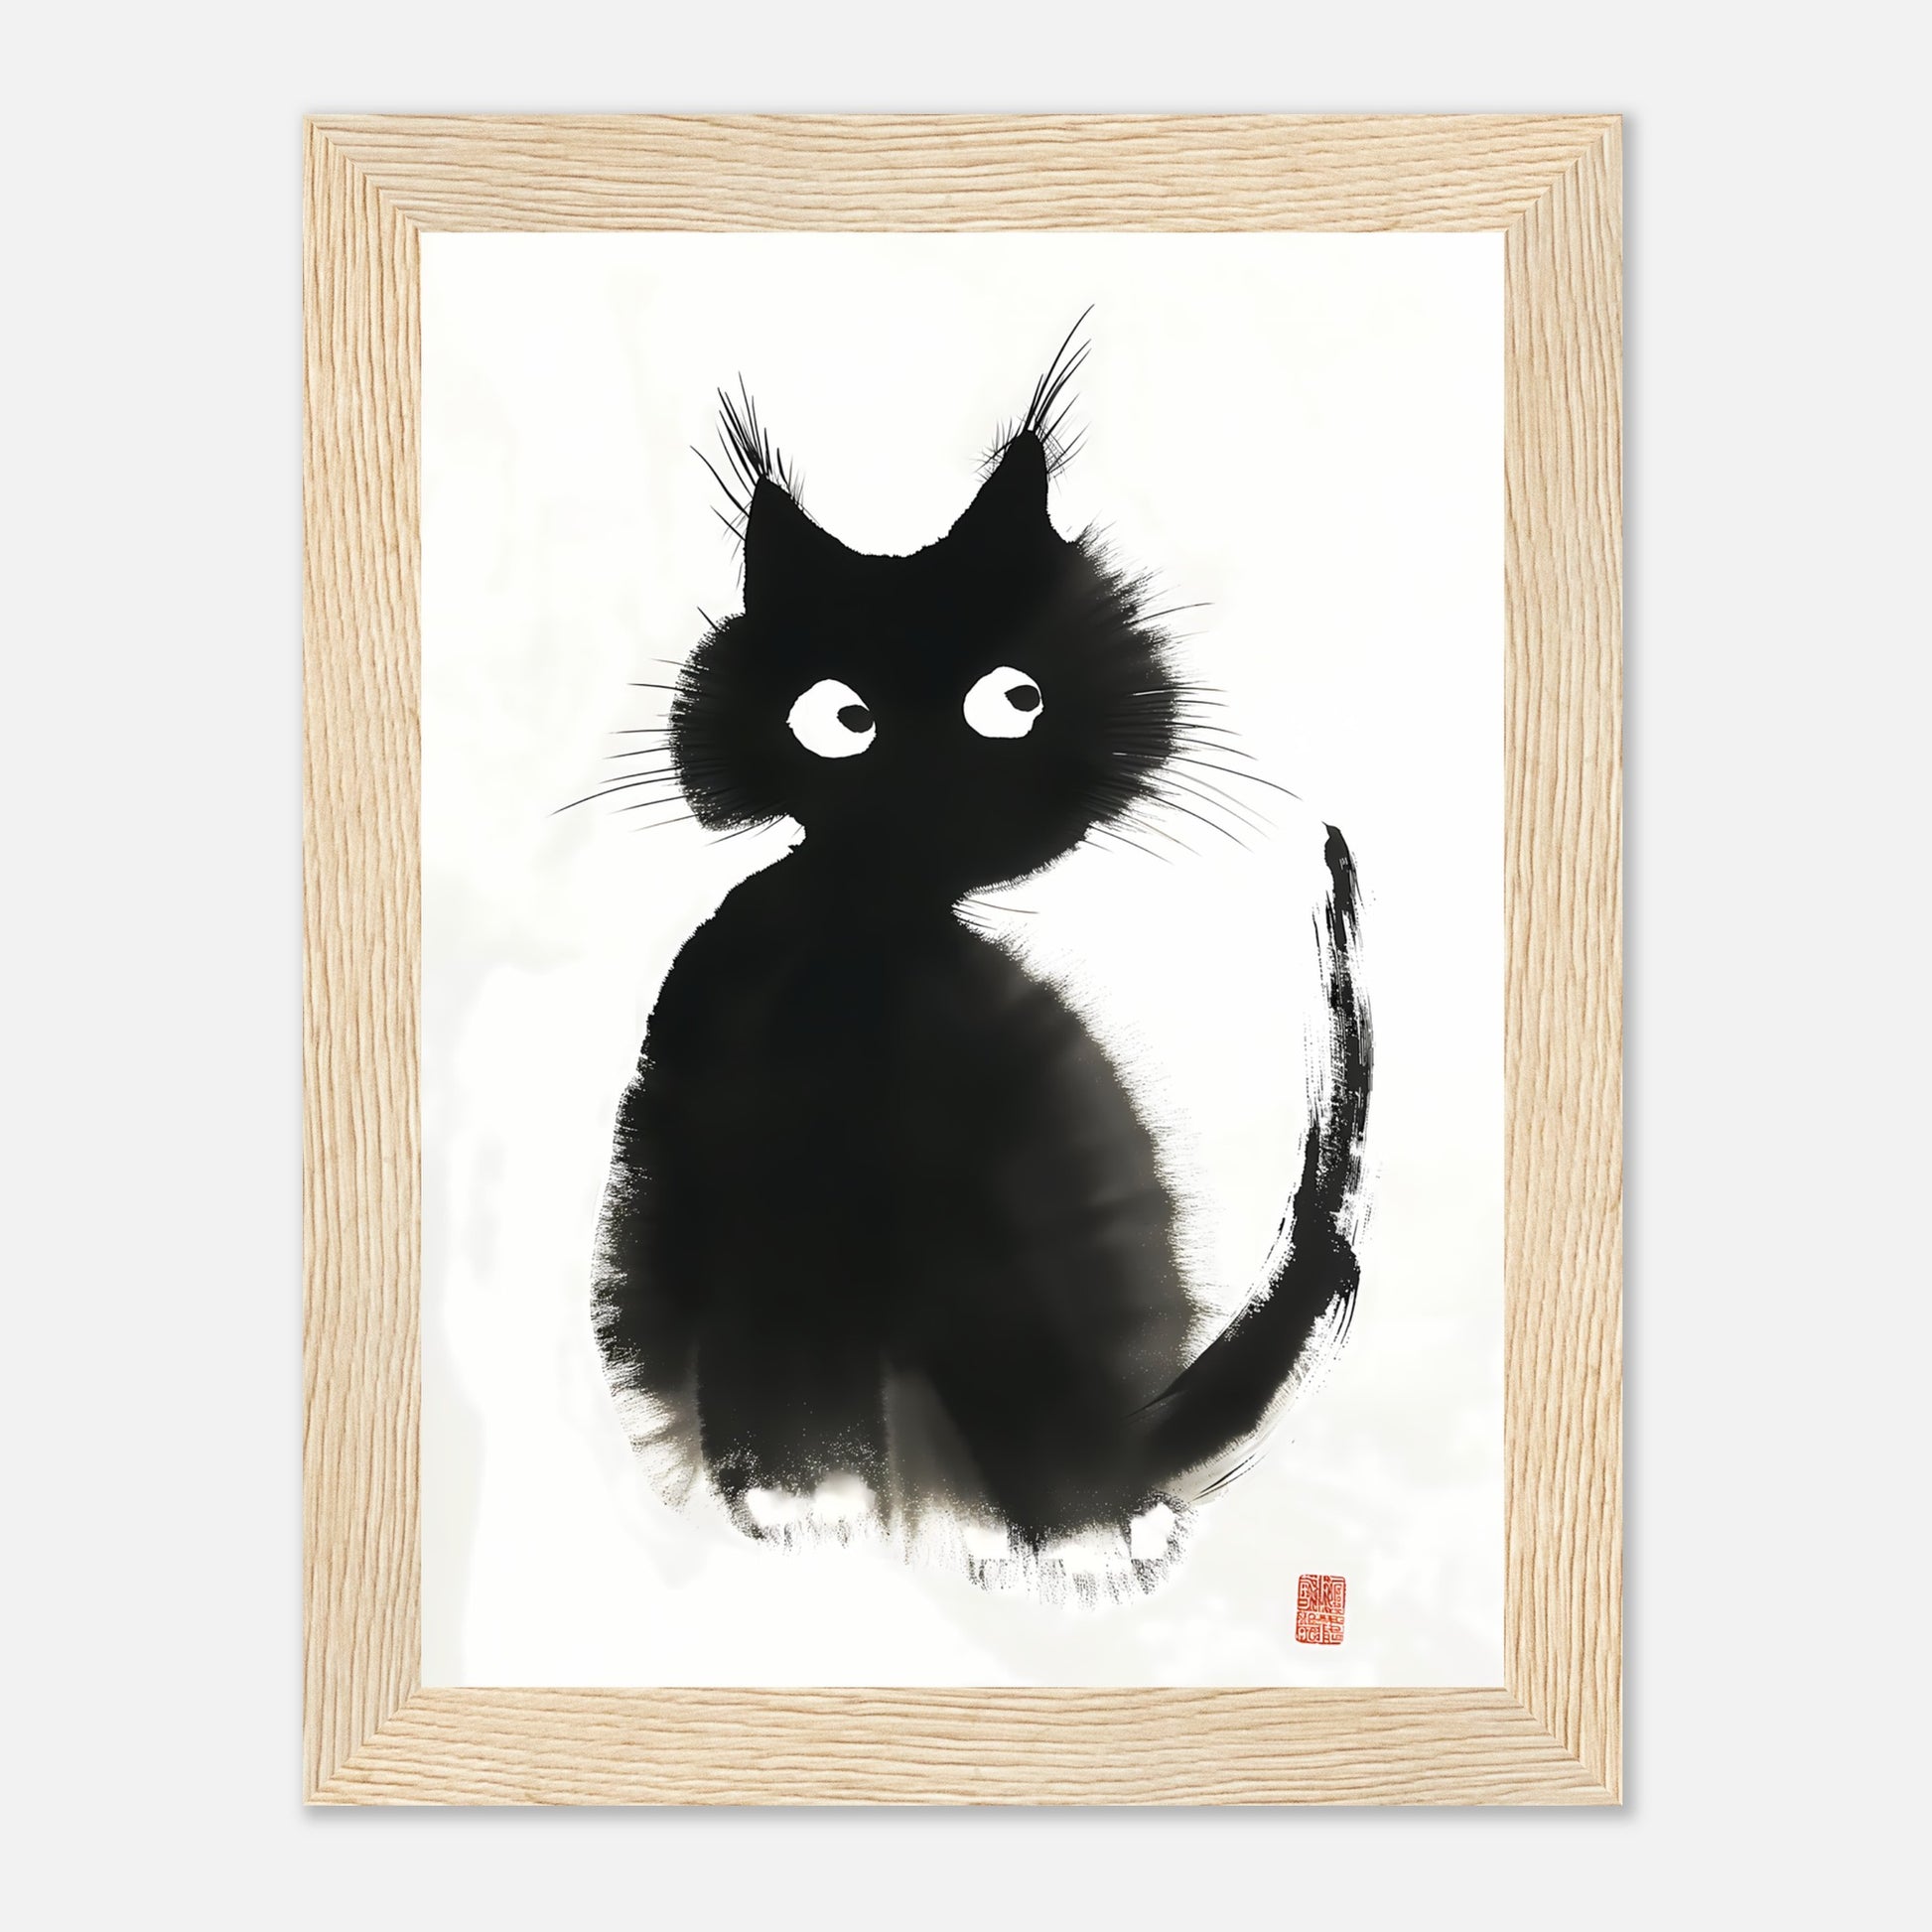 A framed artwork of a stylized black cat with large eyes and abstract fur details.